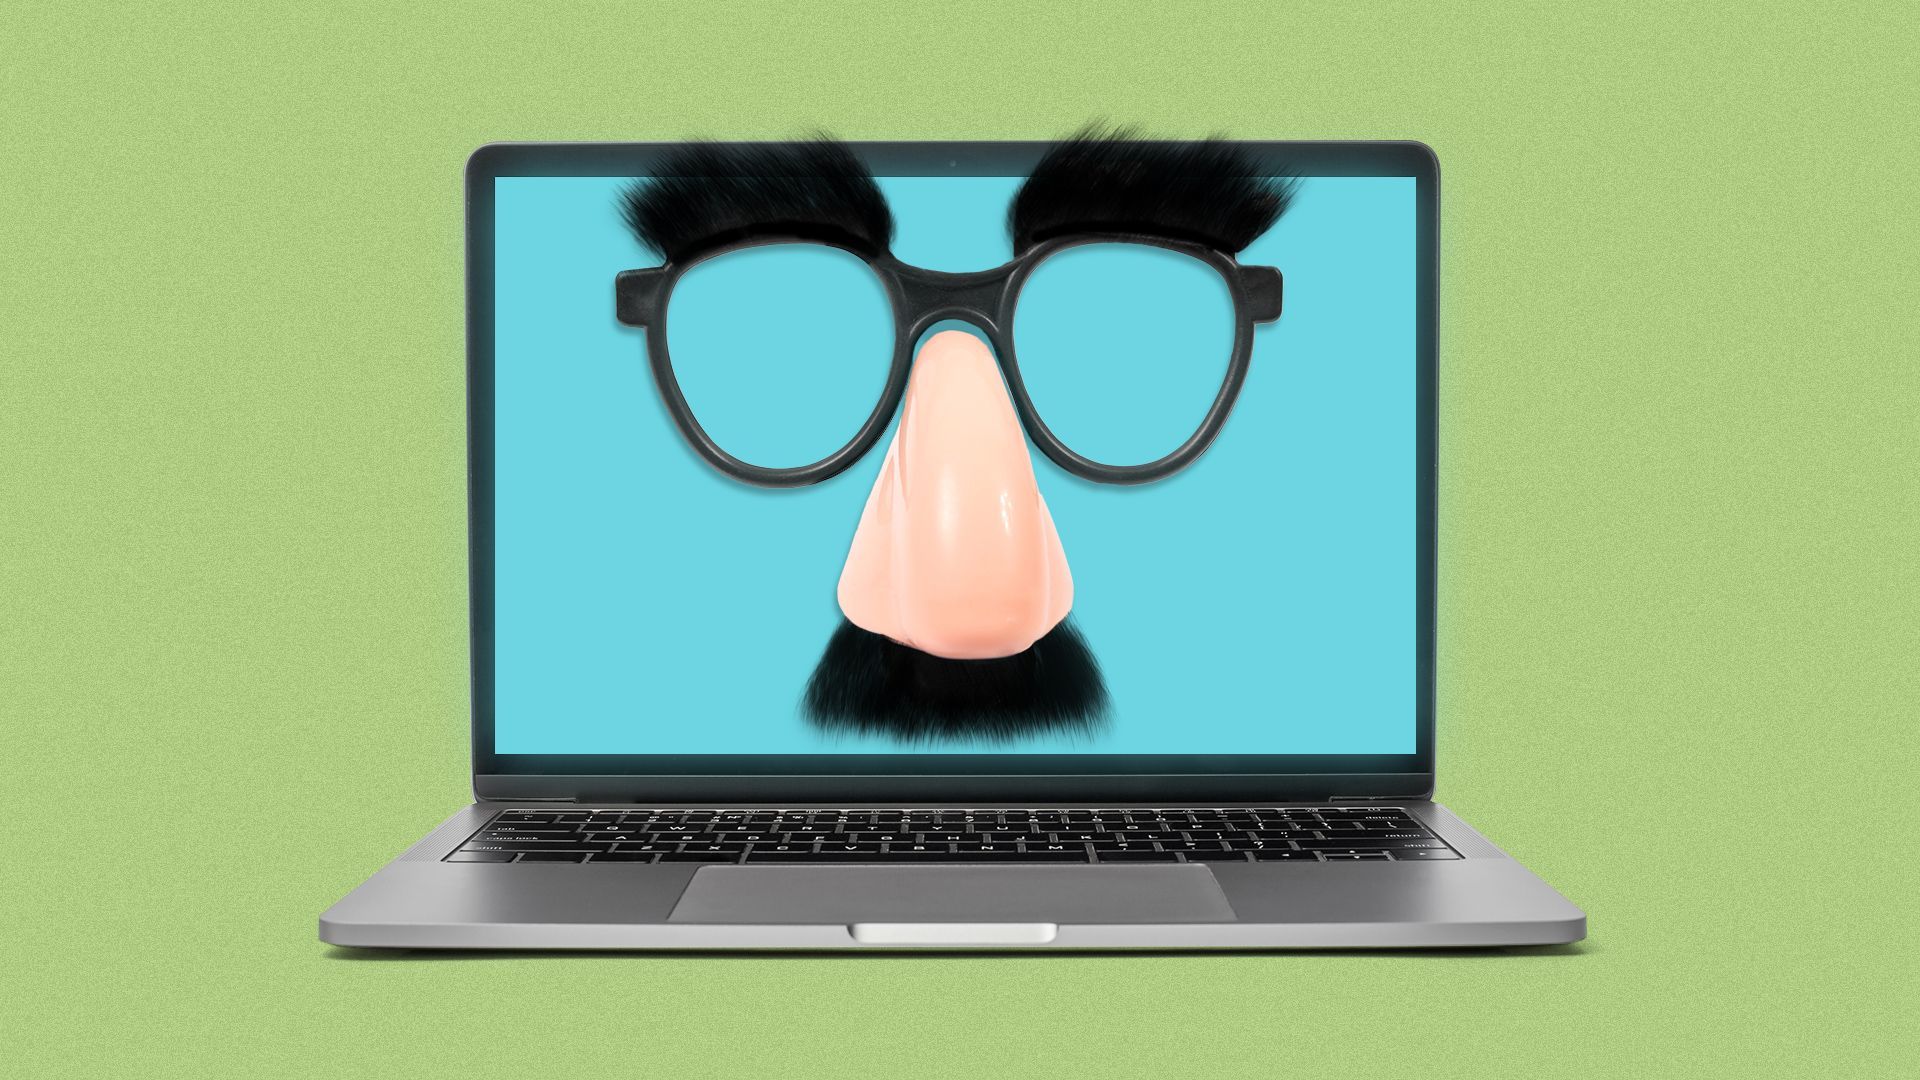 Illustration of a laptop wearing glasses and moustache set disguise. 